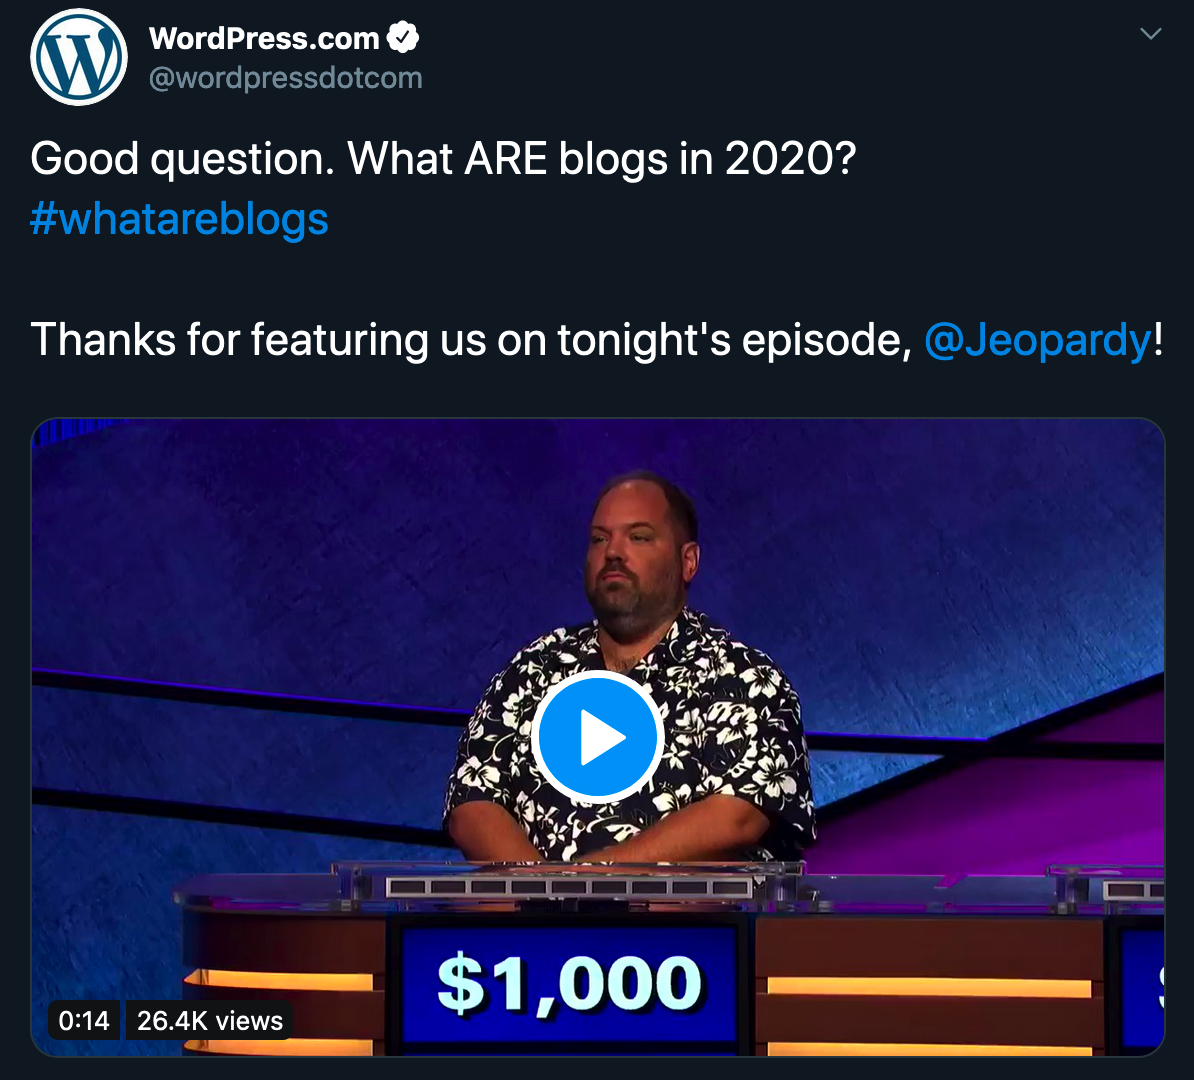 Tweet by @wordpressdotcom: Good question. What ARE blogs in 2020? #whatareblogs  Thanks for featuring us on tonight's episode, @Jeopardy!